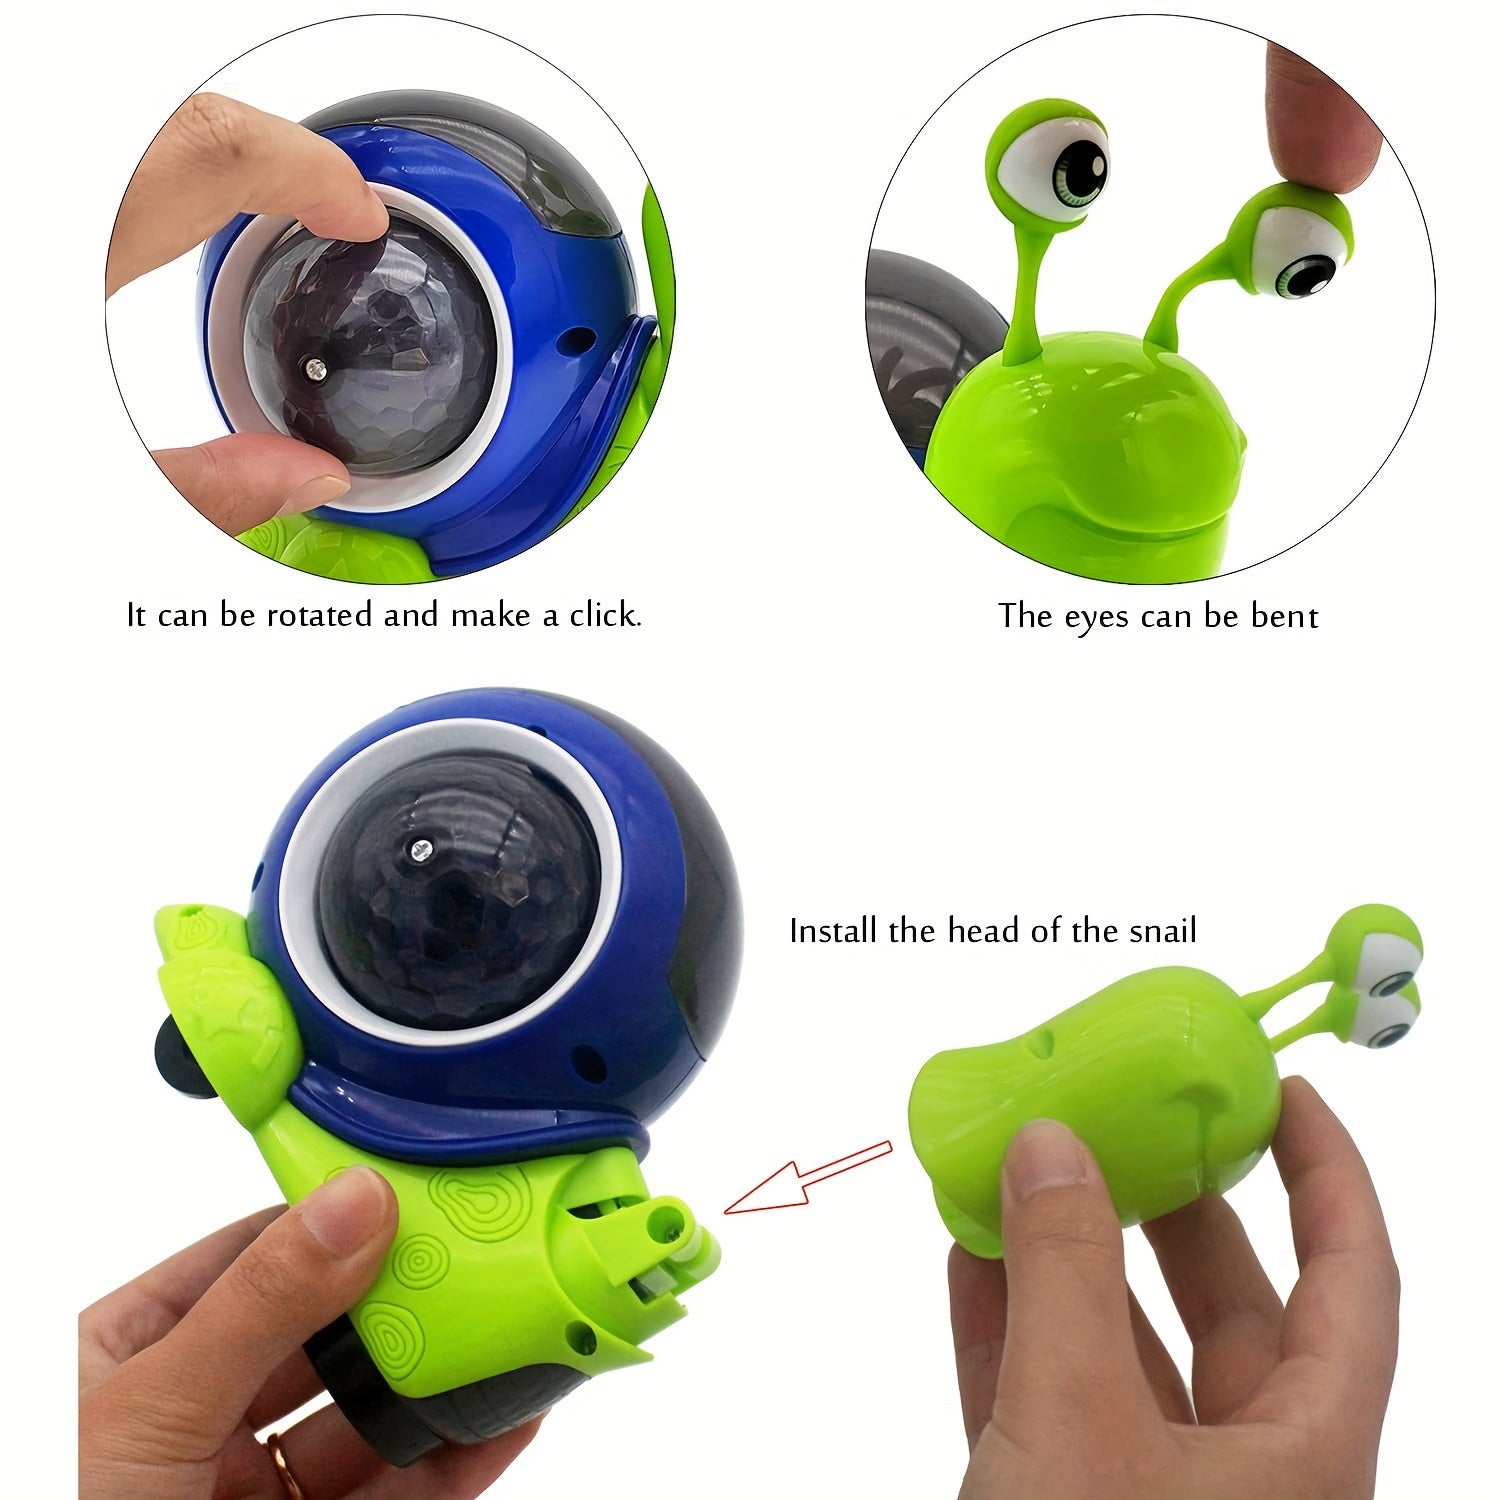 Interactive Musical Light Up Crawling Snail Toy - Early Learning Educational Toy Cykapu